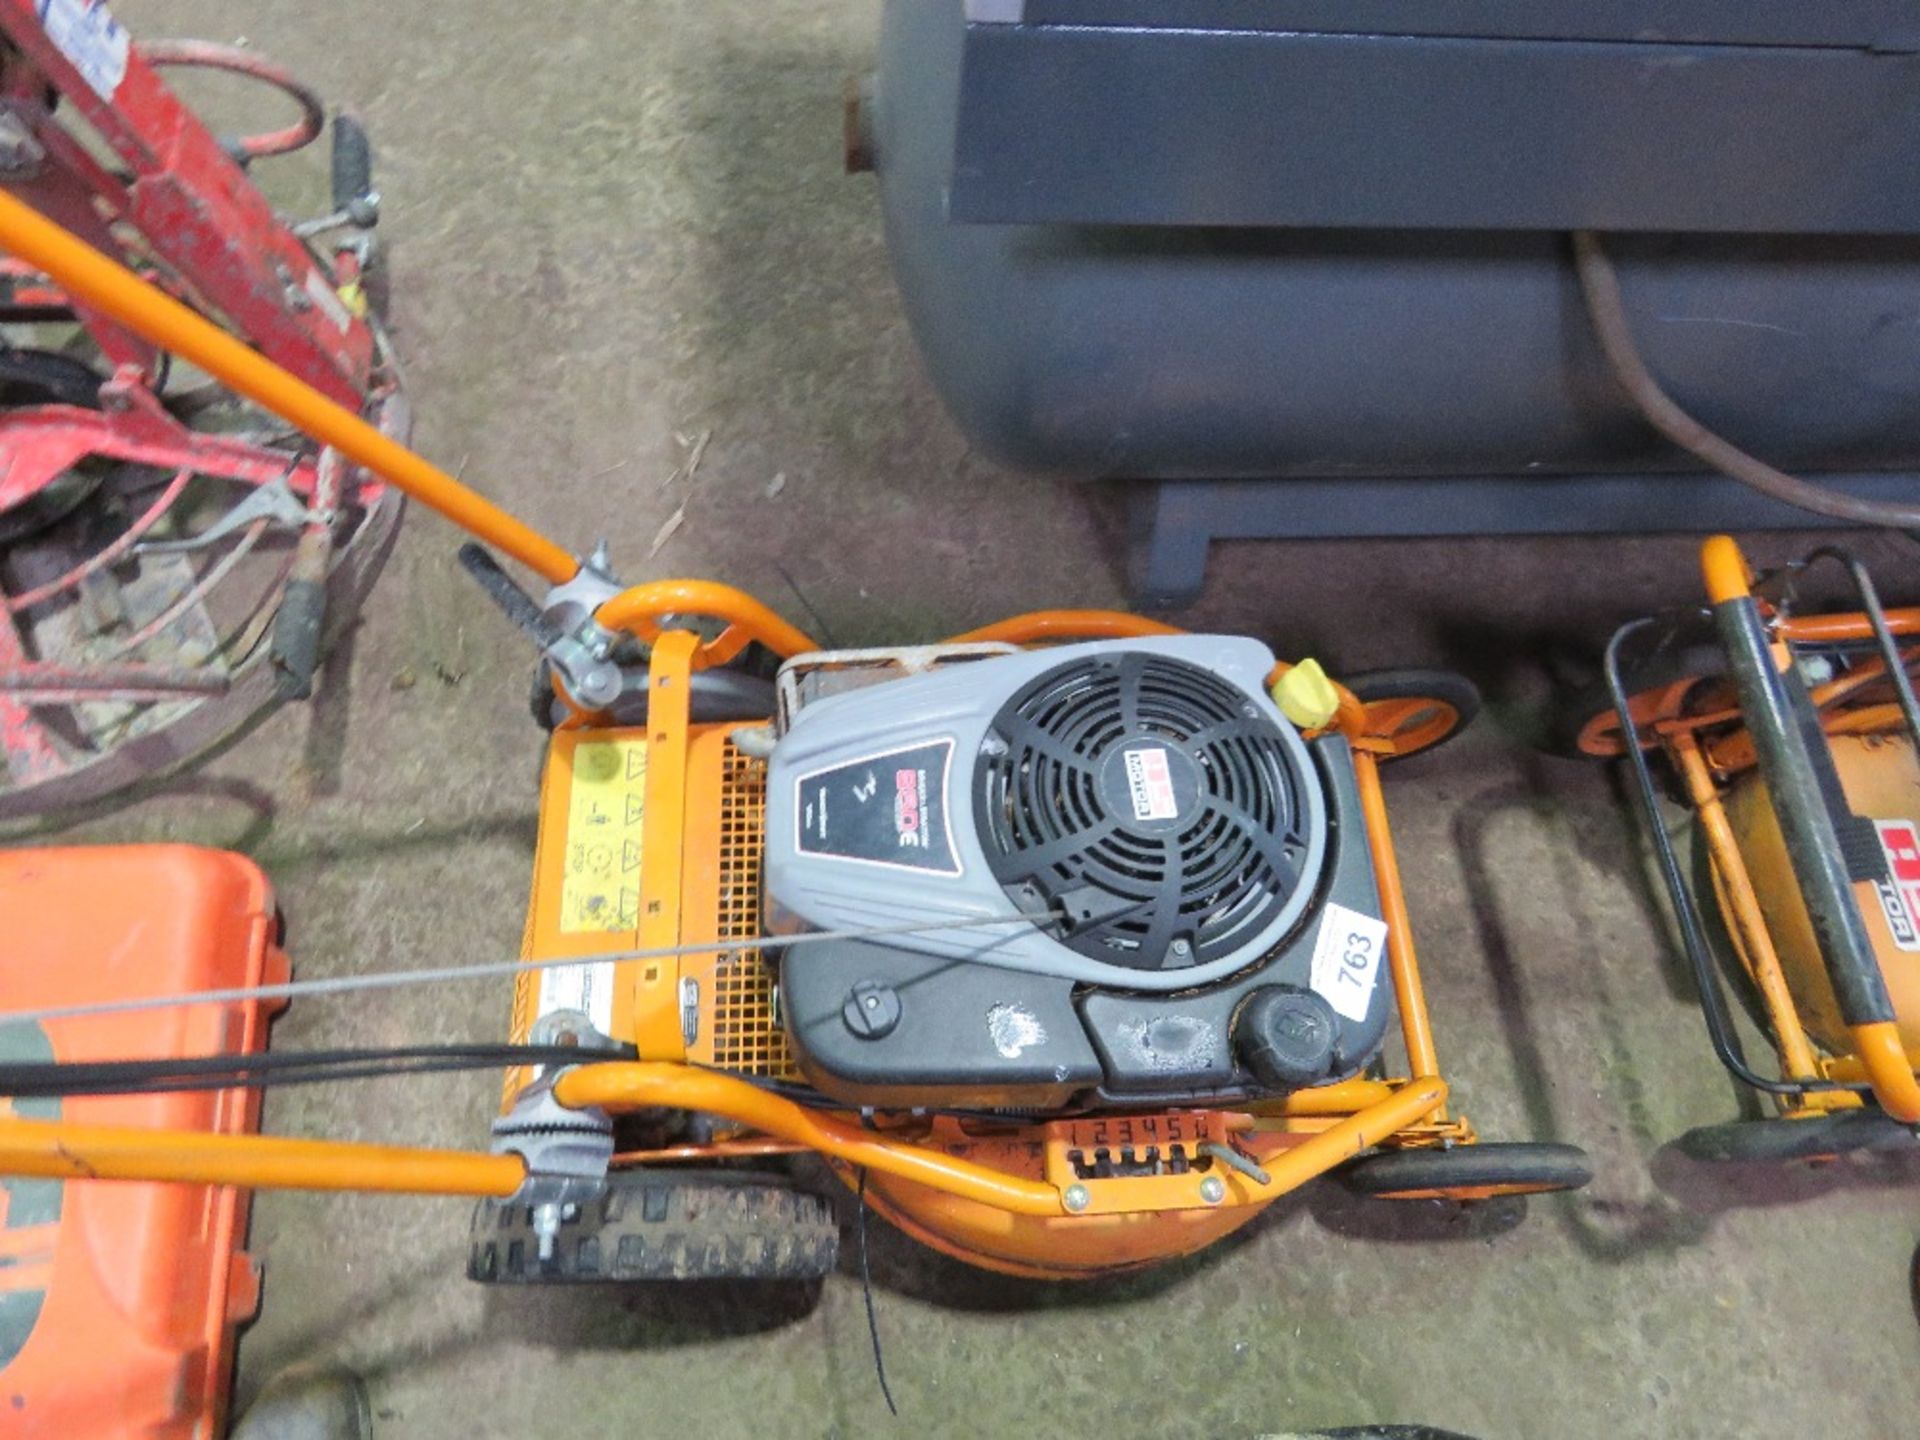 AS MOTOR PROFESSIONAL PETROL ENGINED MOWER. THIS LOT IS SOLD UNDER THE AUCTIONEERS MARGIN SCHEME,